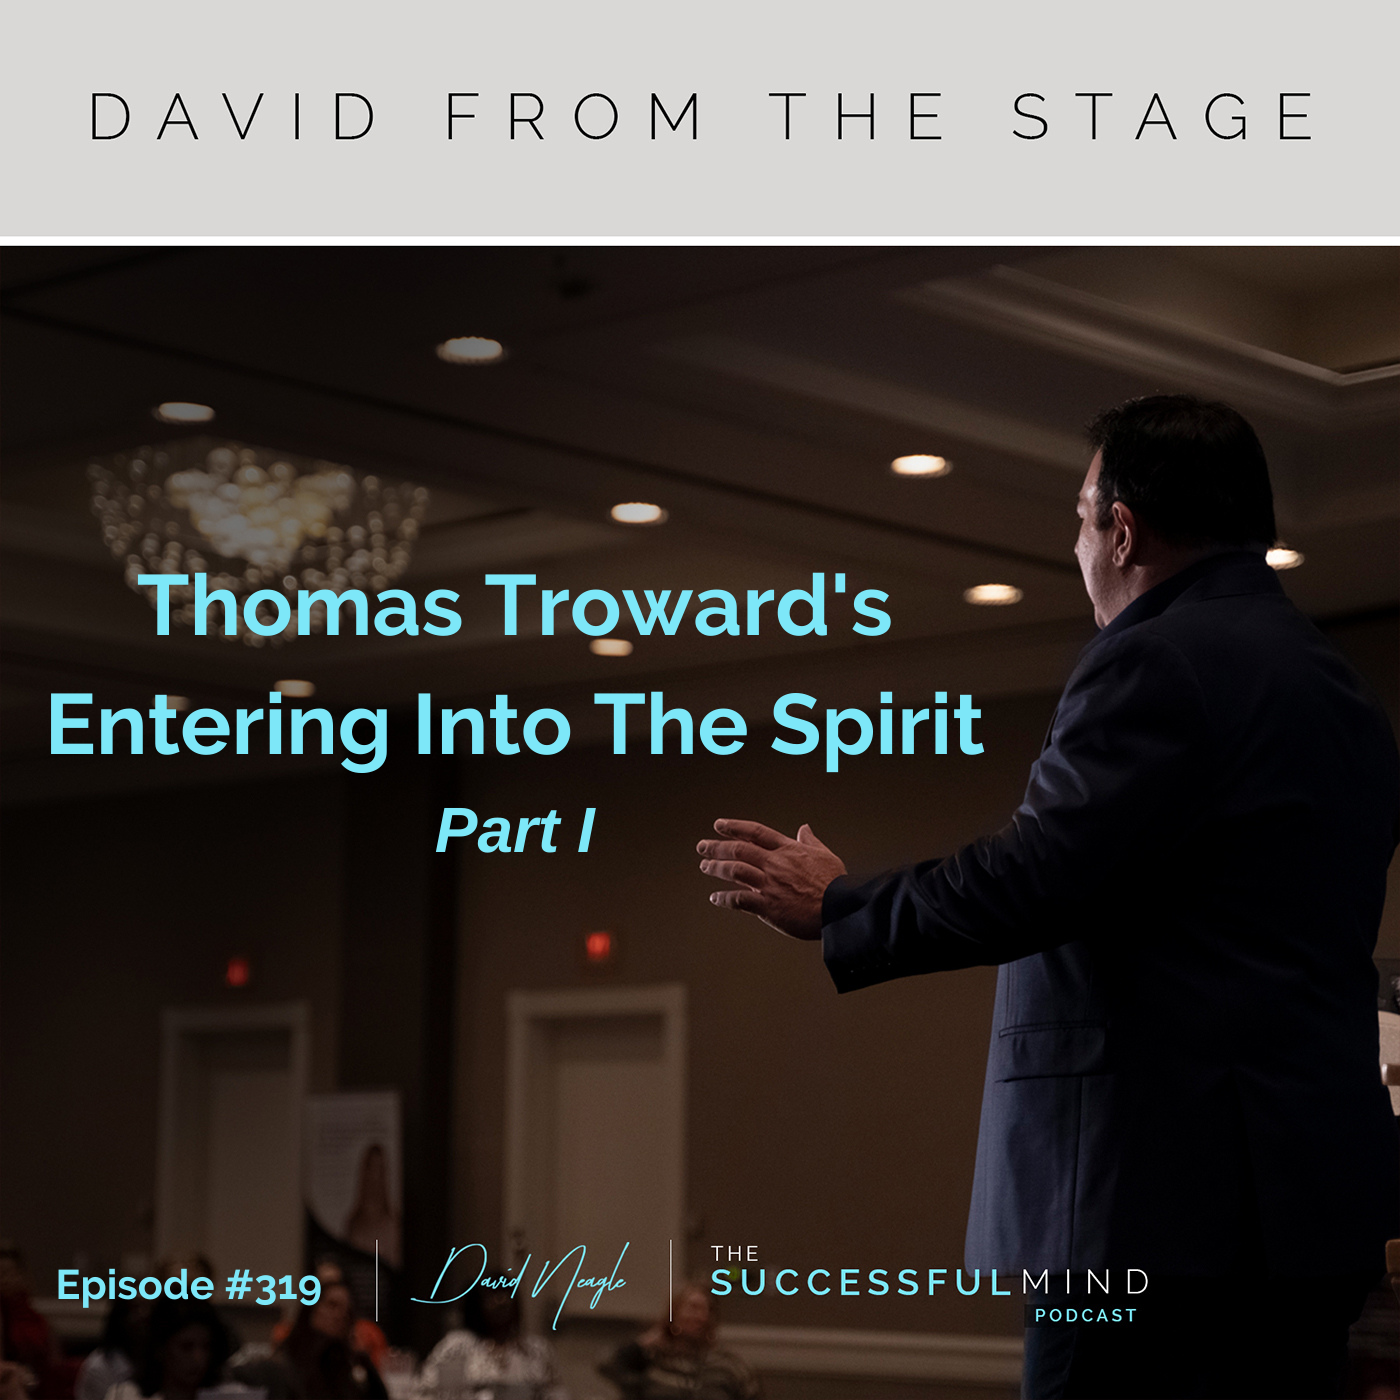 The Successful Mind Podcast - Entering Into The Spirit Part I